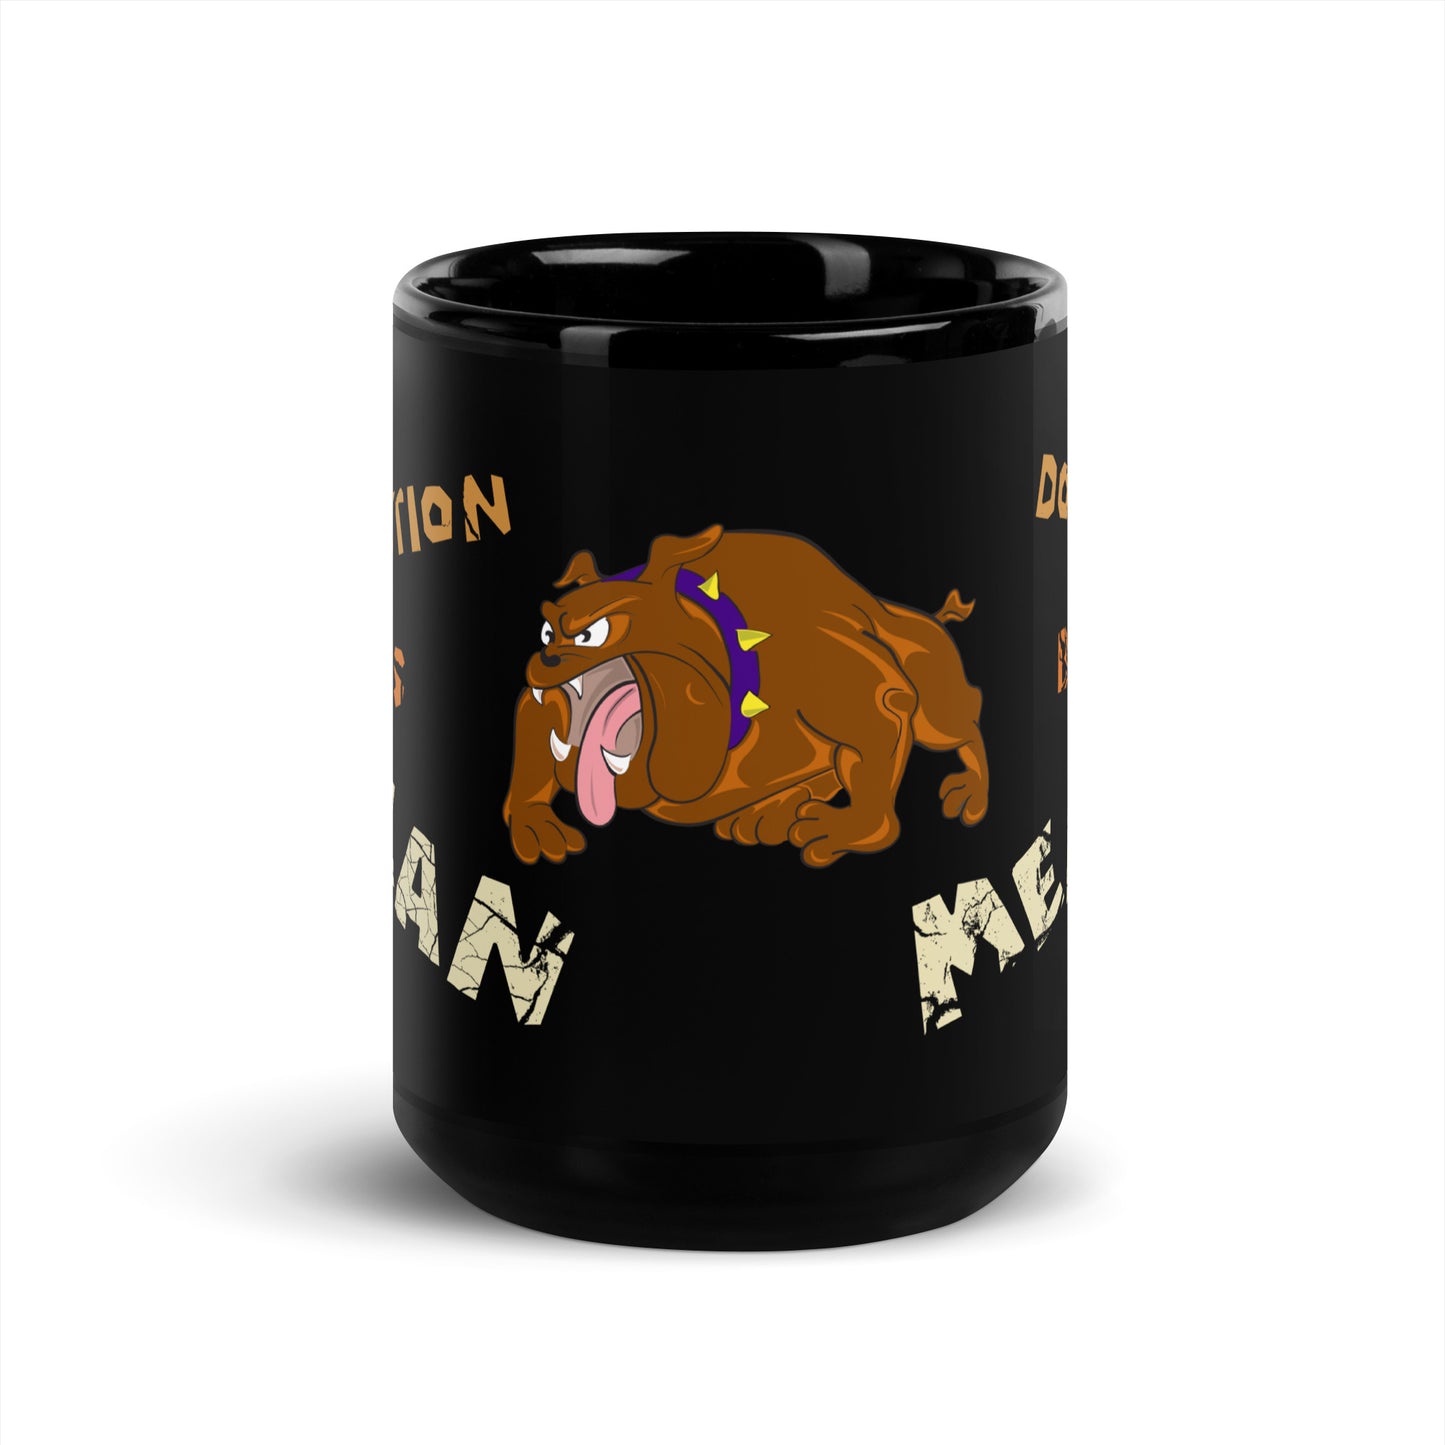 A001 Mug - Black Glossy Ceramic Mug Featuring Bulldog Graphic with text “Abortion is Mean. Don’t be Mean.”